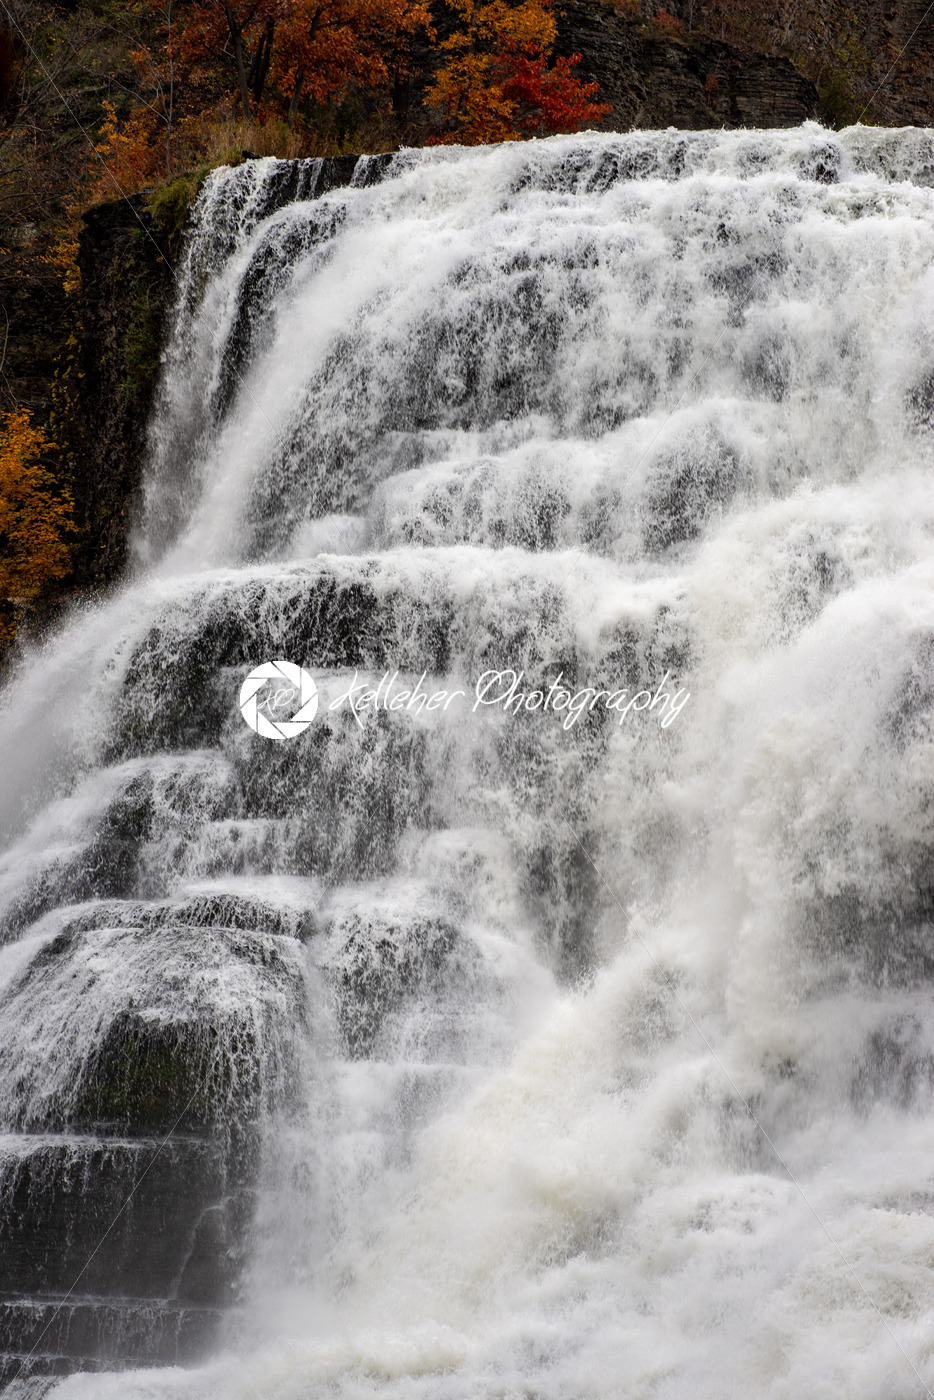 Ithaca Falls in the Finger Lakes region, Ithaca, New York. This is the last and largest of several waterfalls on Fall Creek. - Kelleher Photography Store